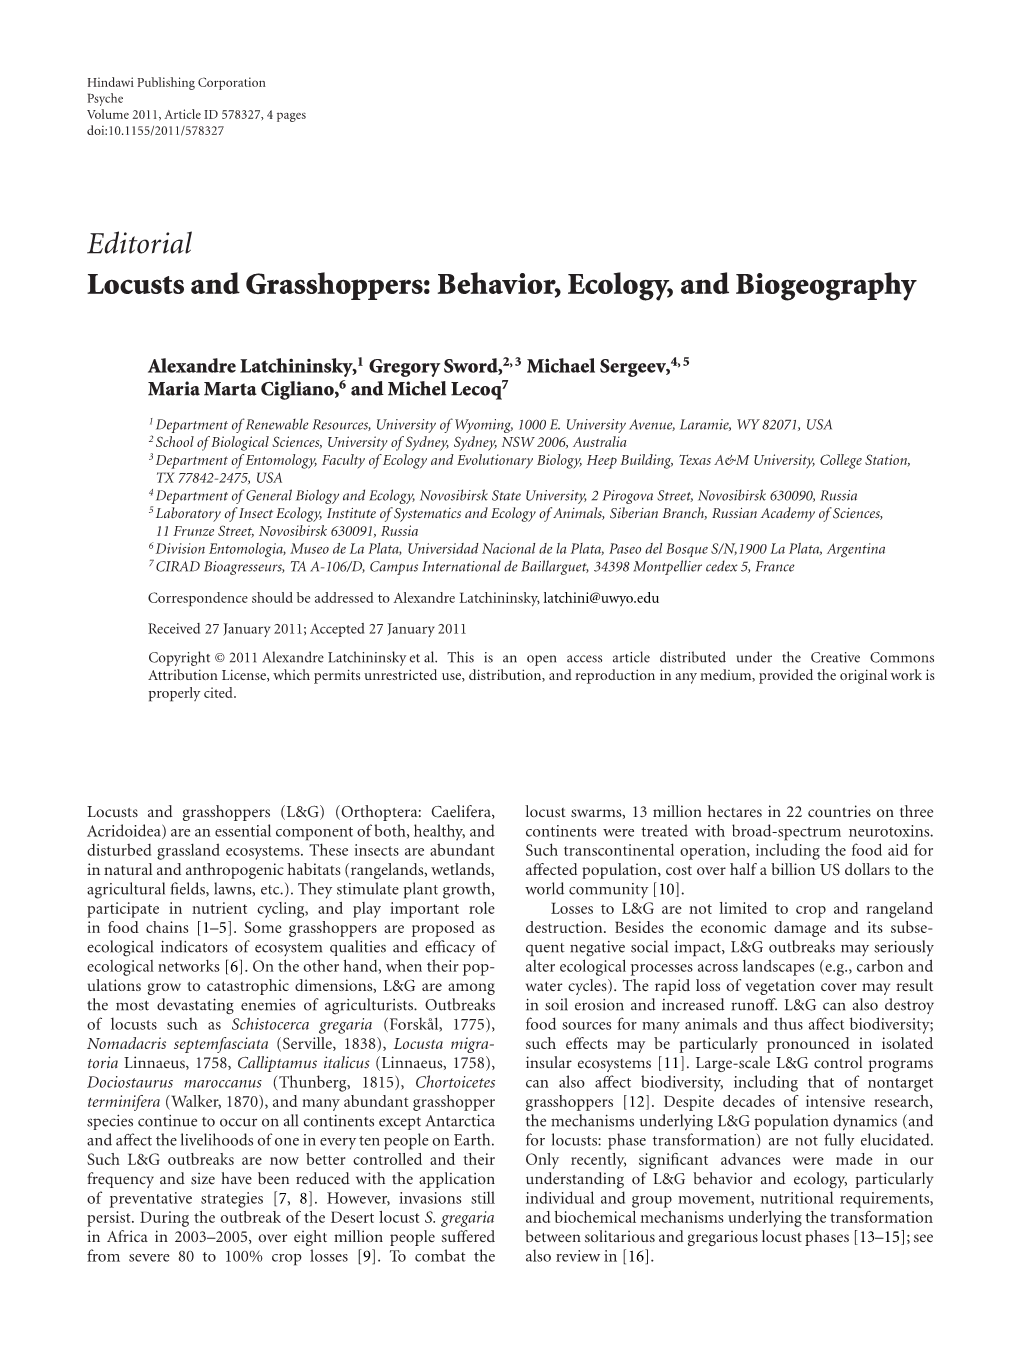 Editorial Locusts and Grasshoppers: Behavior, Ecology, and Biogeography